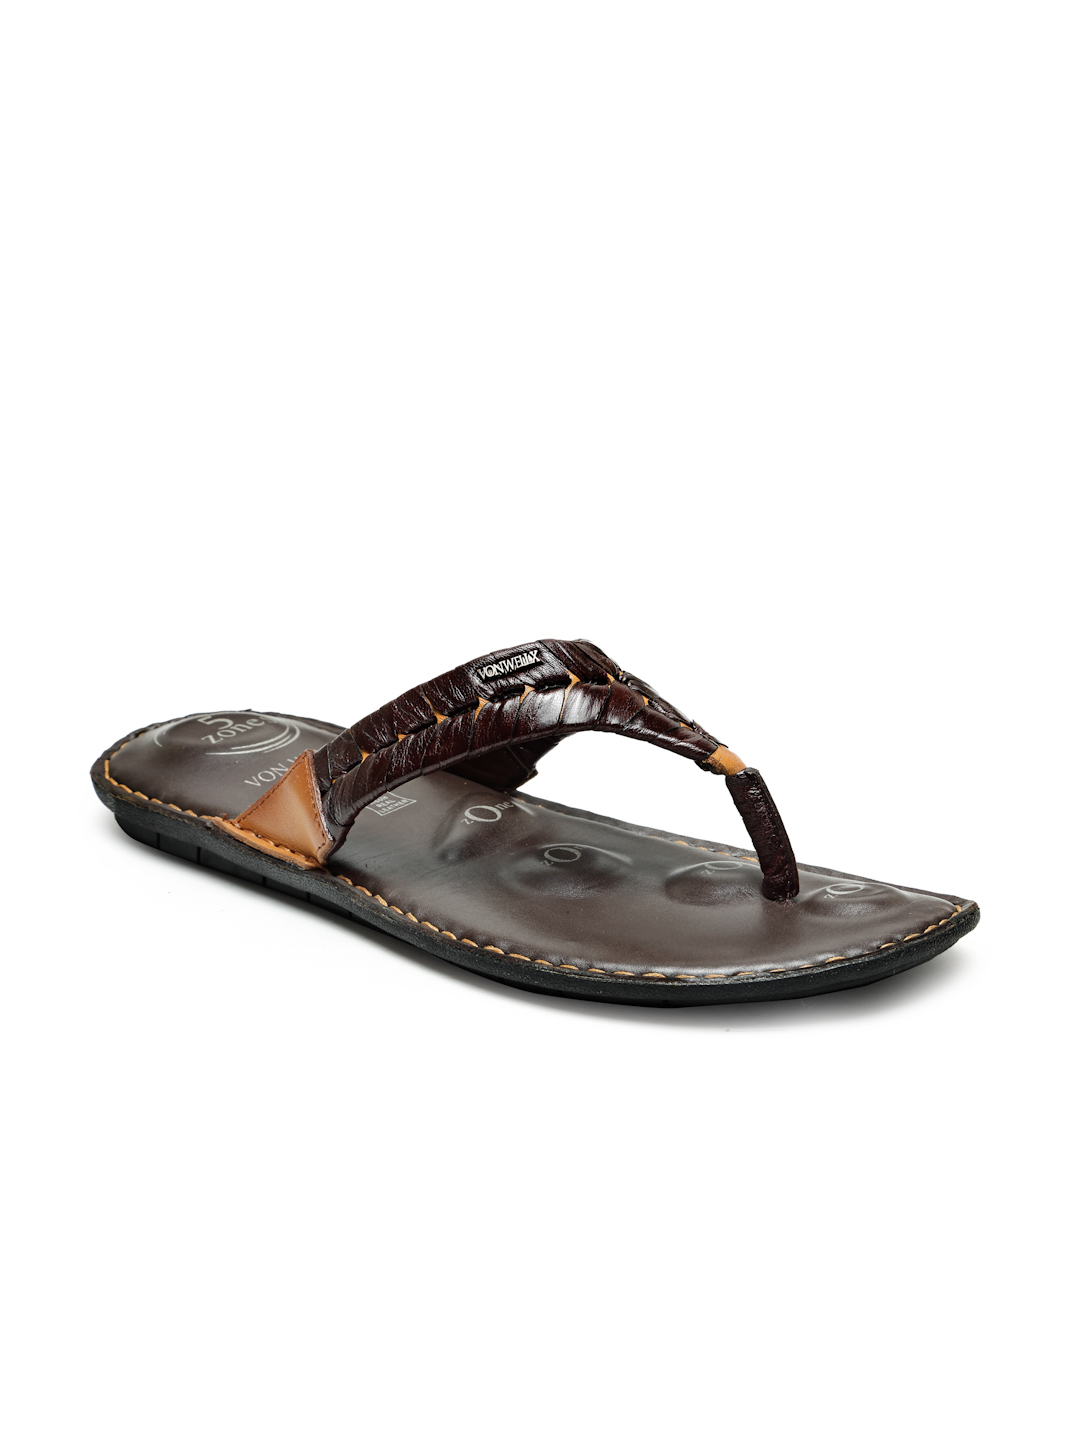 Buy Von Wellx Germany Comfort Men's Tan Slippers Alonso Online in Kandy